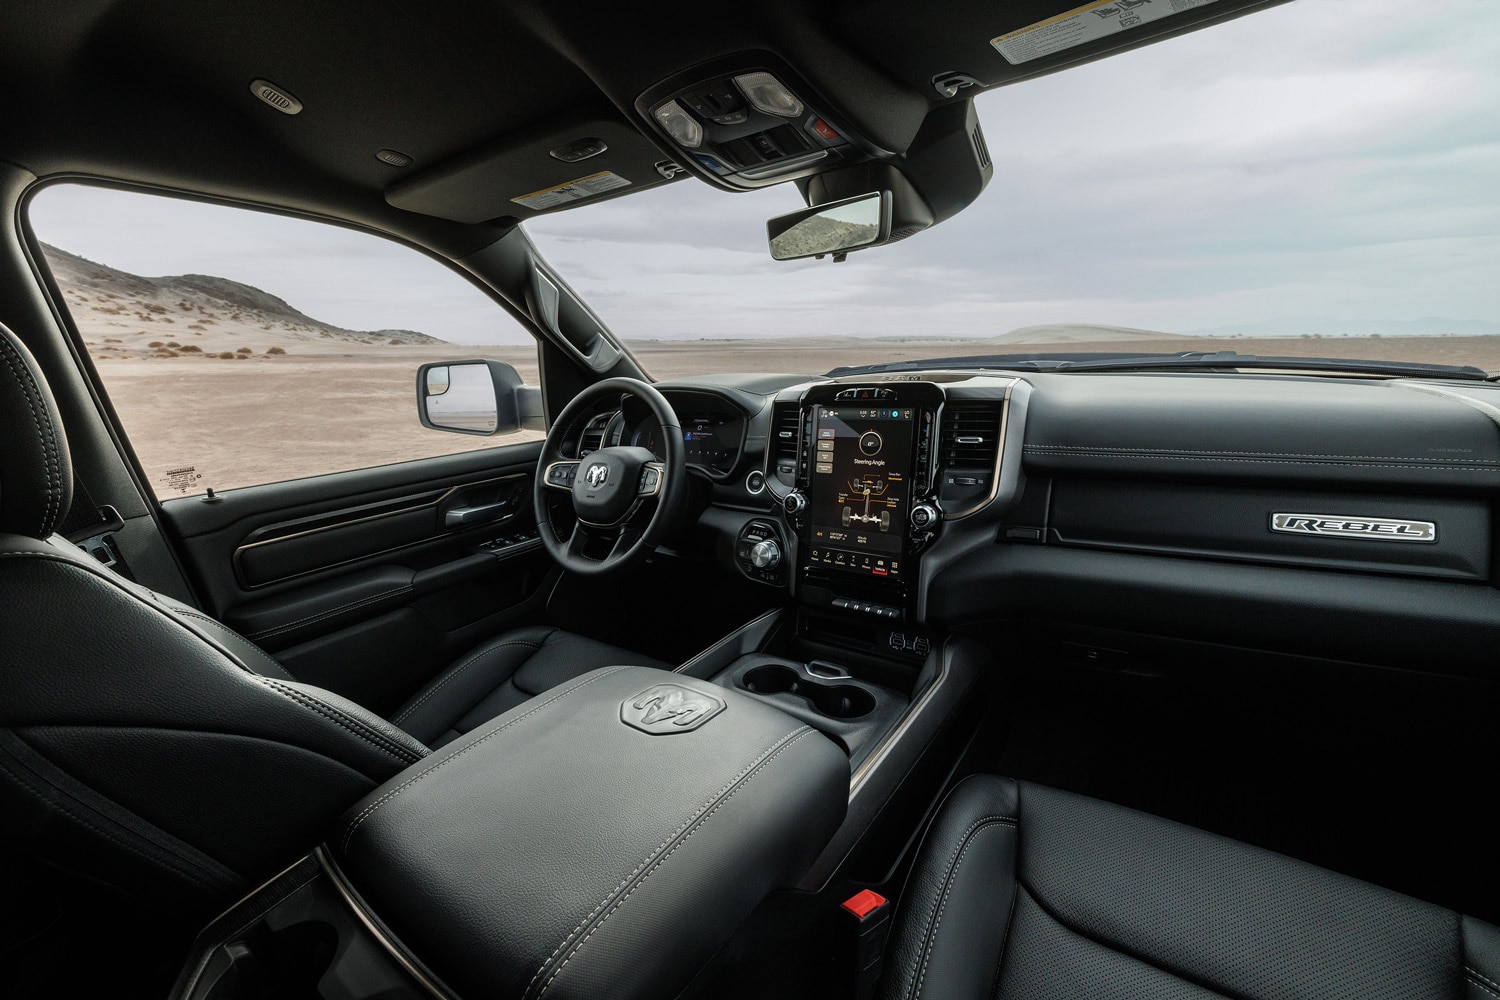  2023 Ram 1500 with 12.0-inch touchscreen infotainment system